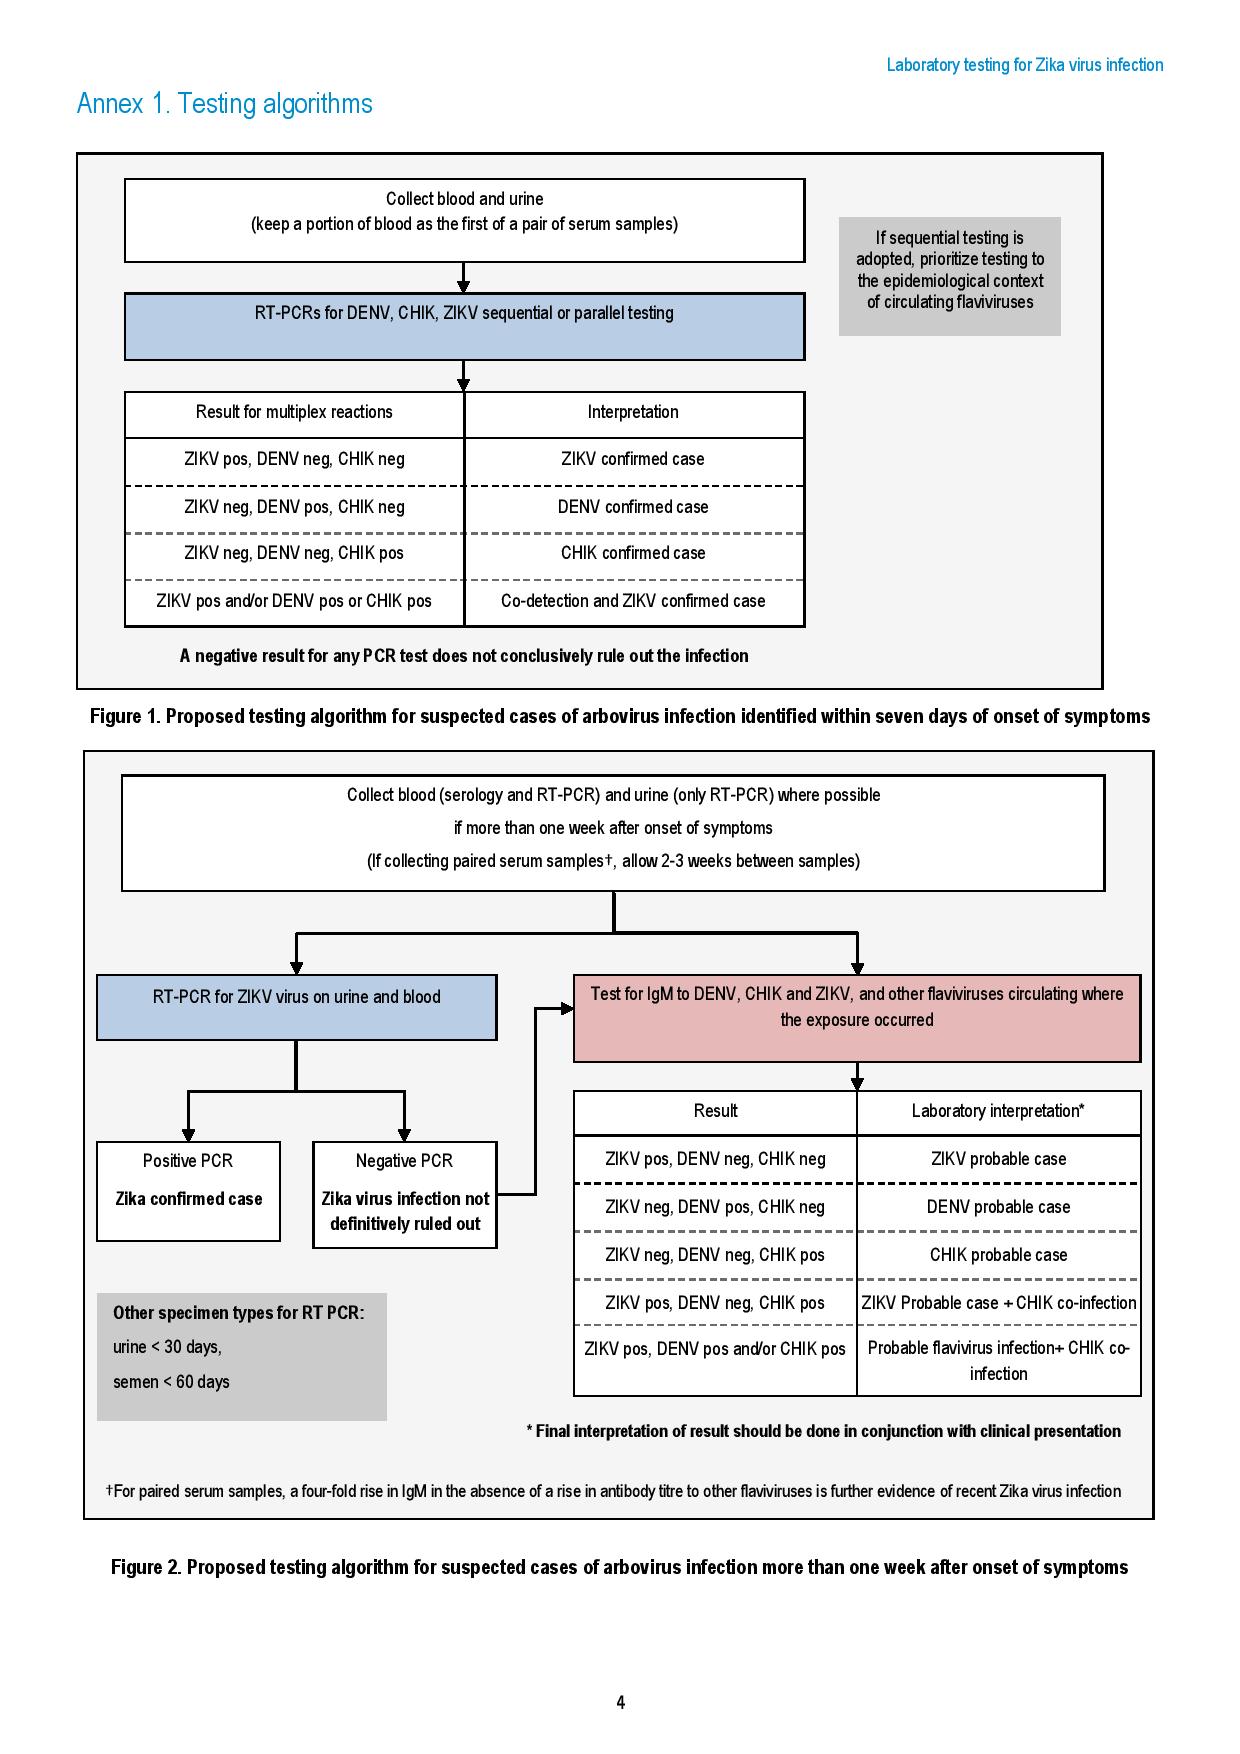 Proposed testing algorithm within 7 days and after 7 days of onset of symptoms